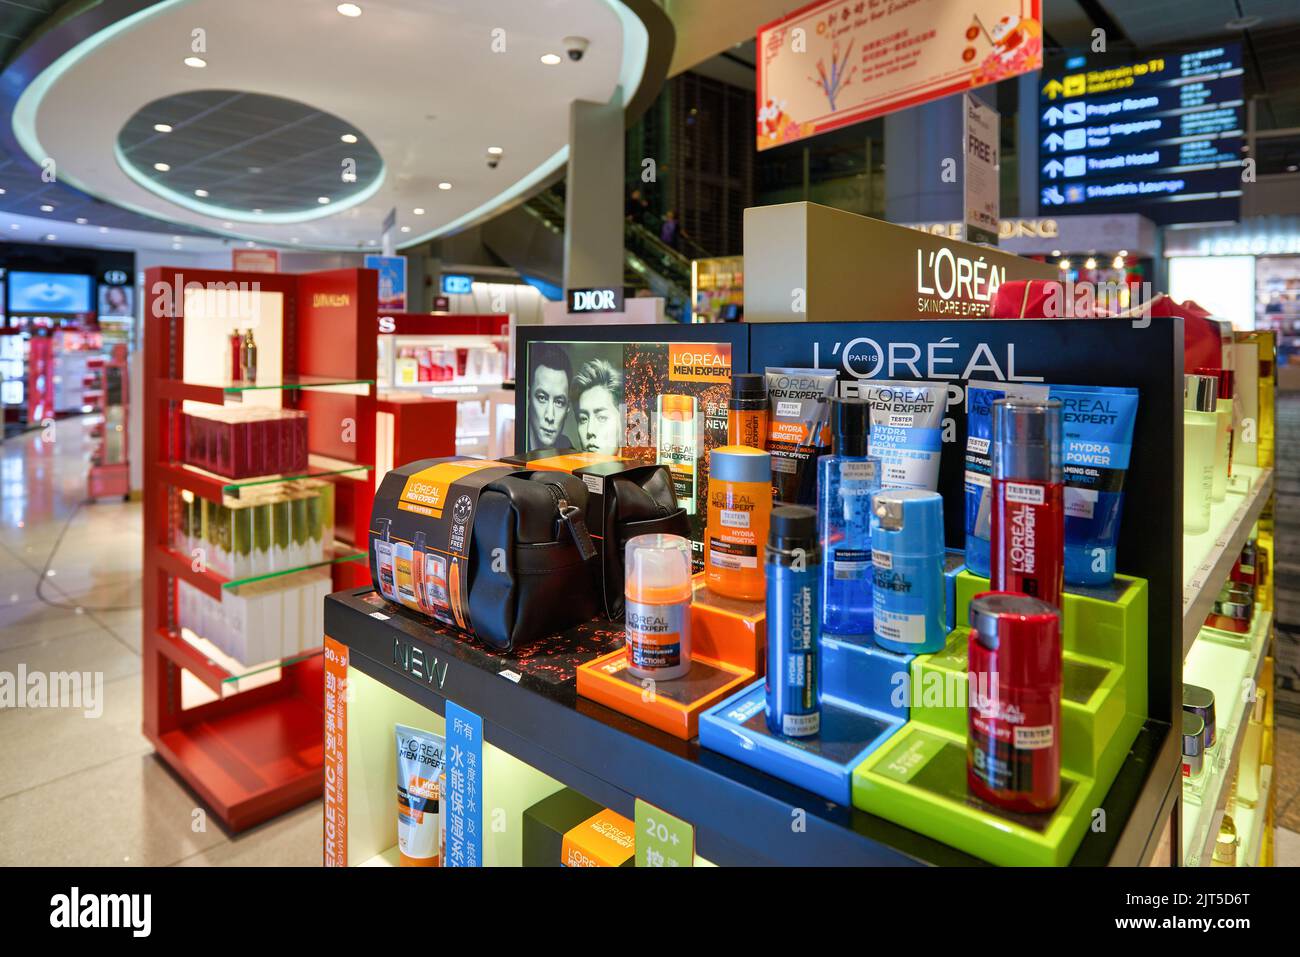 SINGAPORE - CIRCA JANUARY, 2020: L'Oreal personal care products on display at store in Changi Airport. Stock Photo